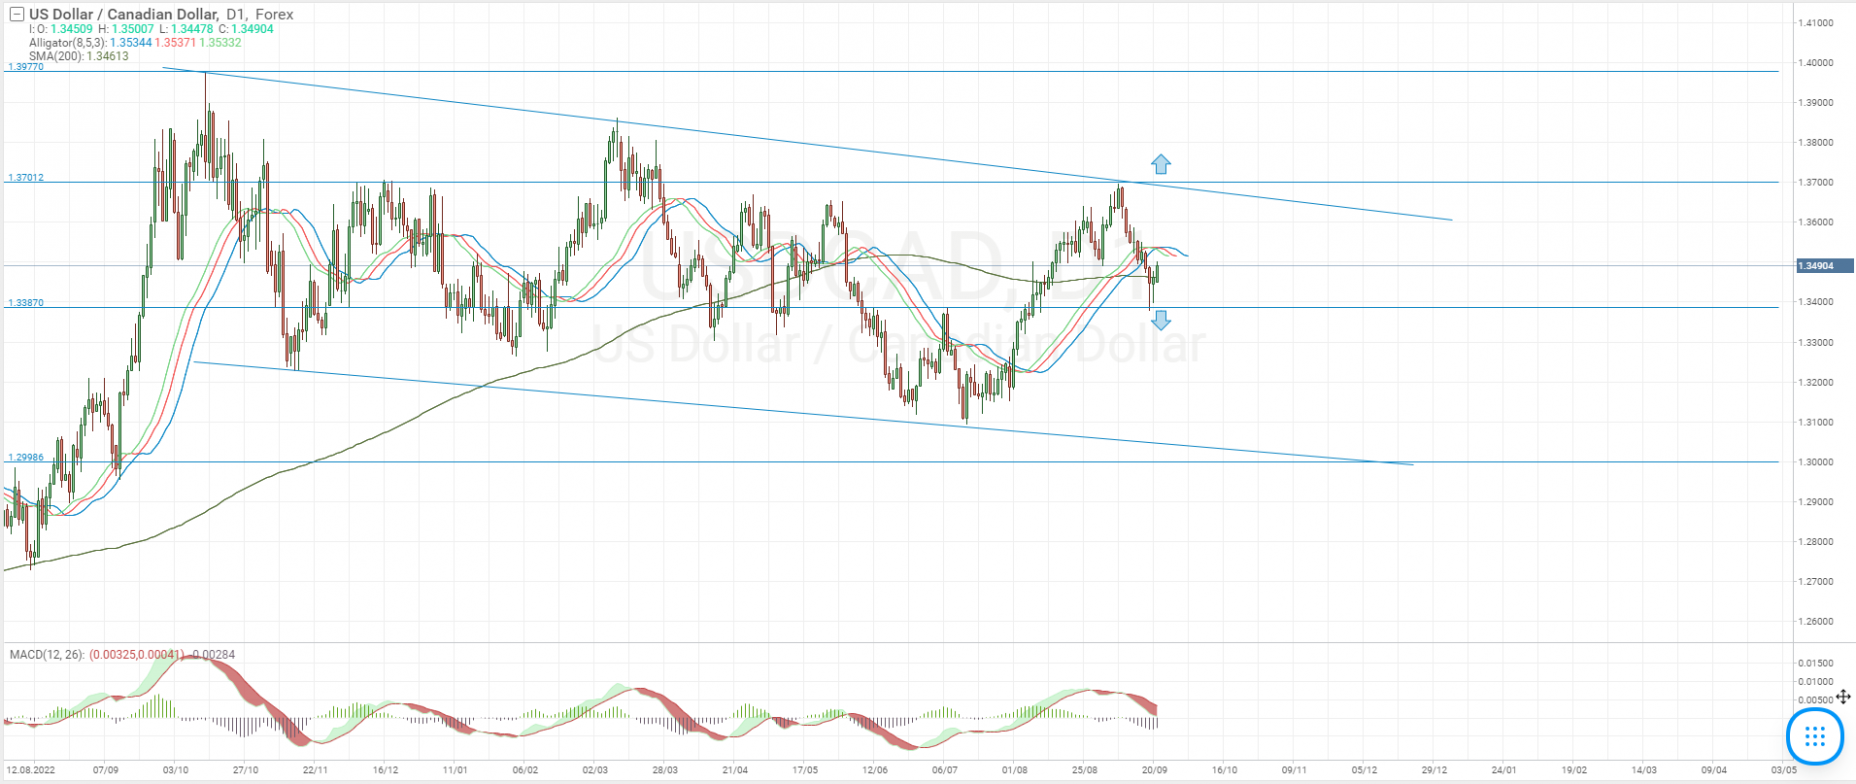 Technical analysis of the USD/CAD currency pair